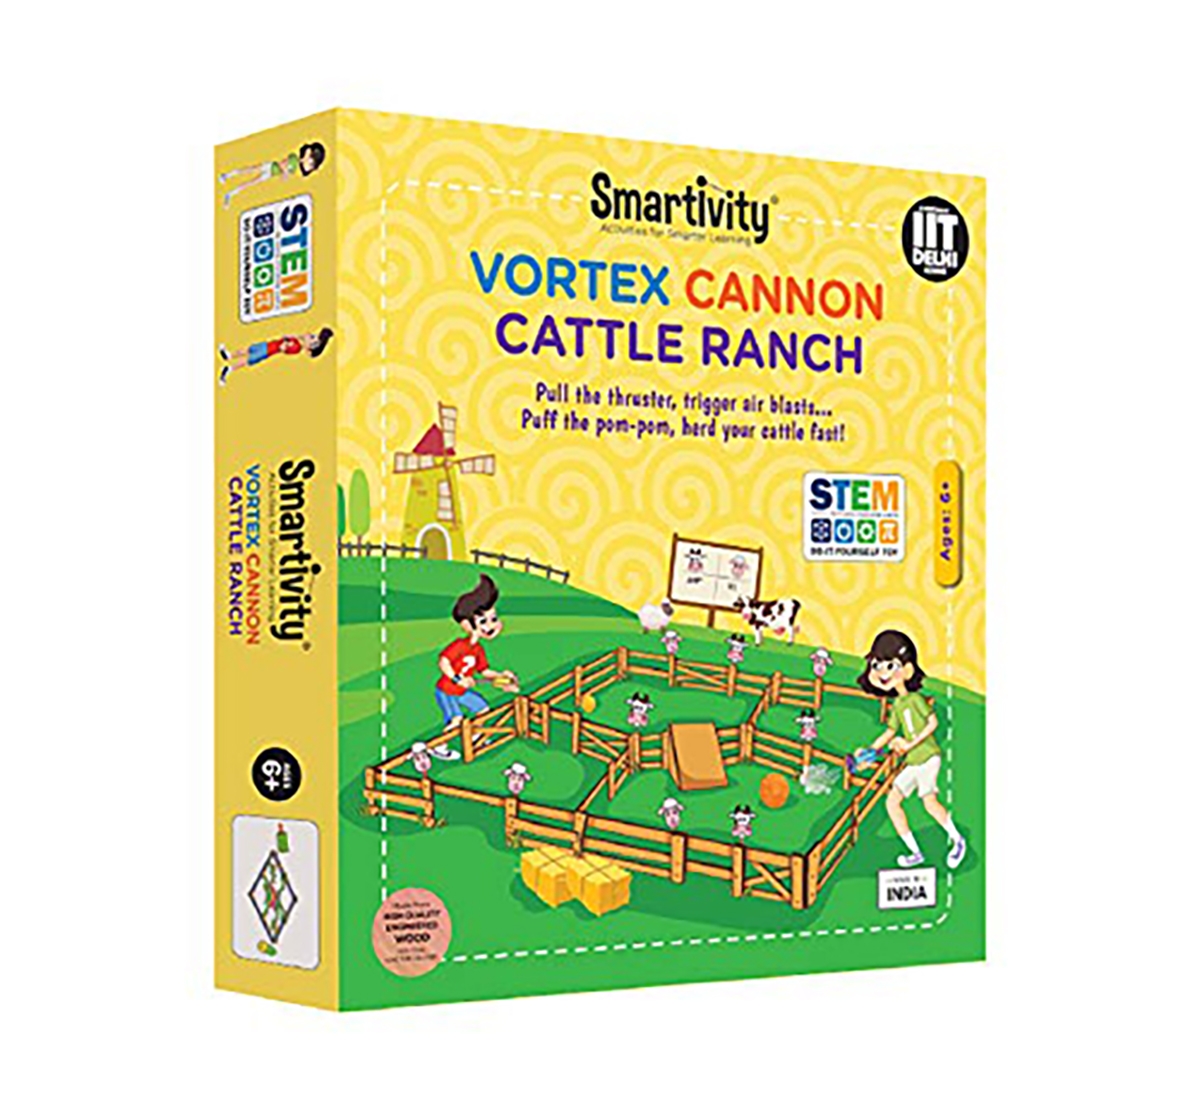 Smartivity | Smartivity Vortex Cannon Cattle Ranch: Stem, Learning, Educational and Construction Activity Toy Gift for Kids age 6Y+  4